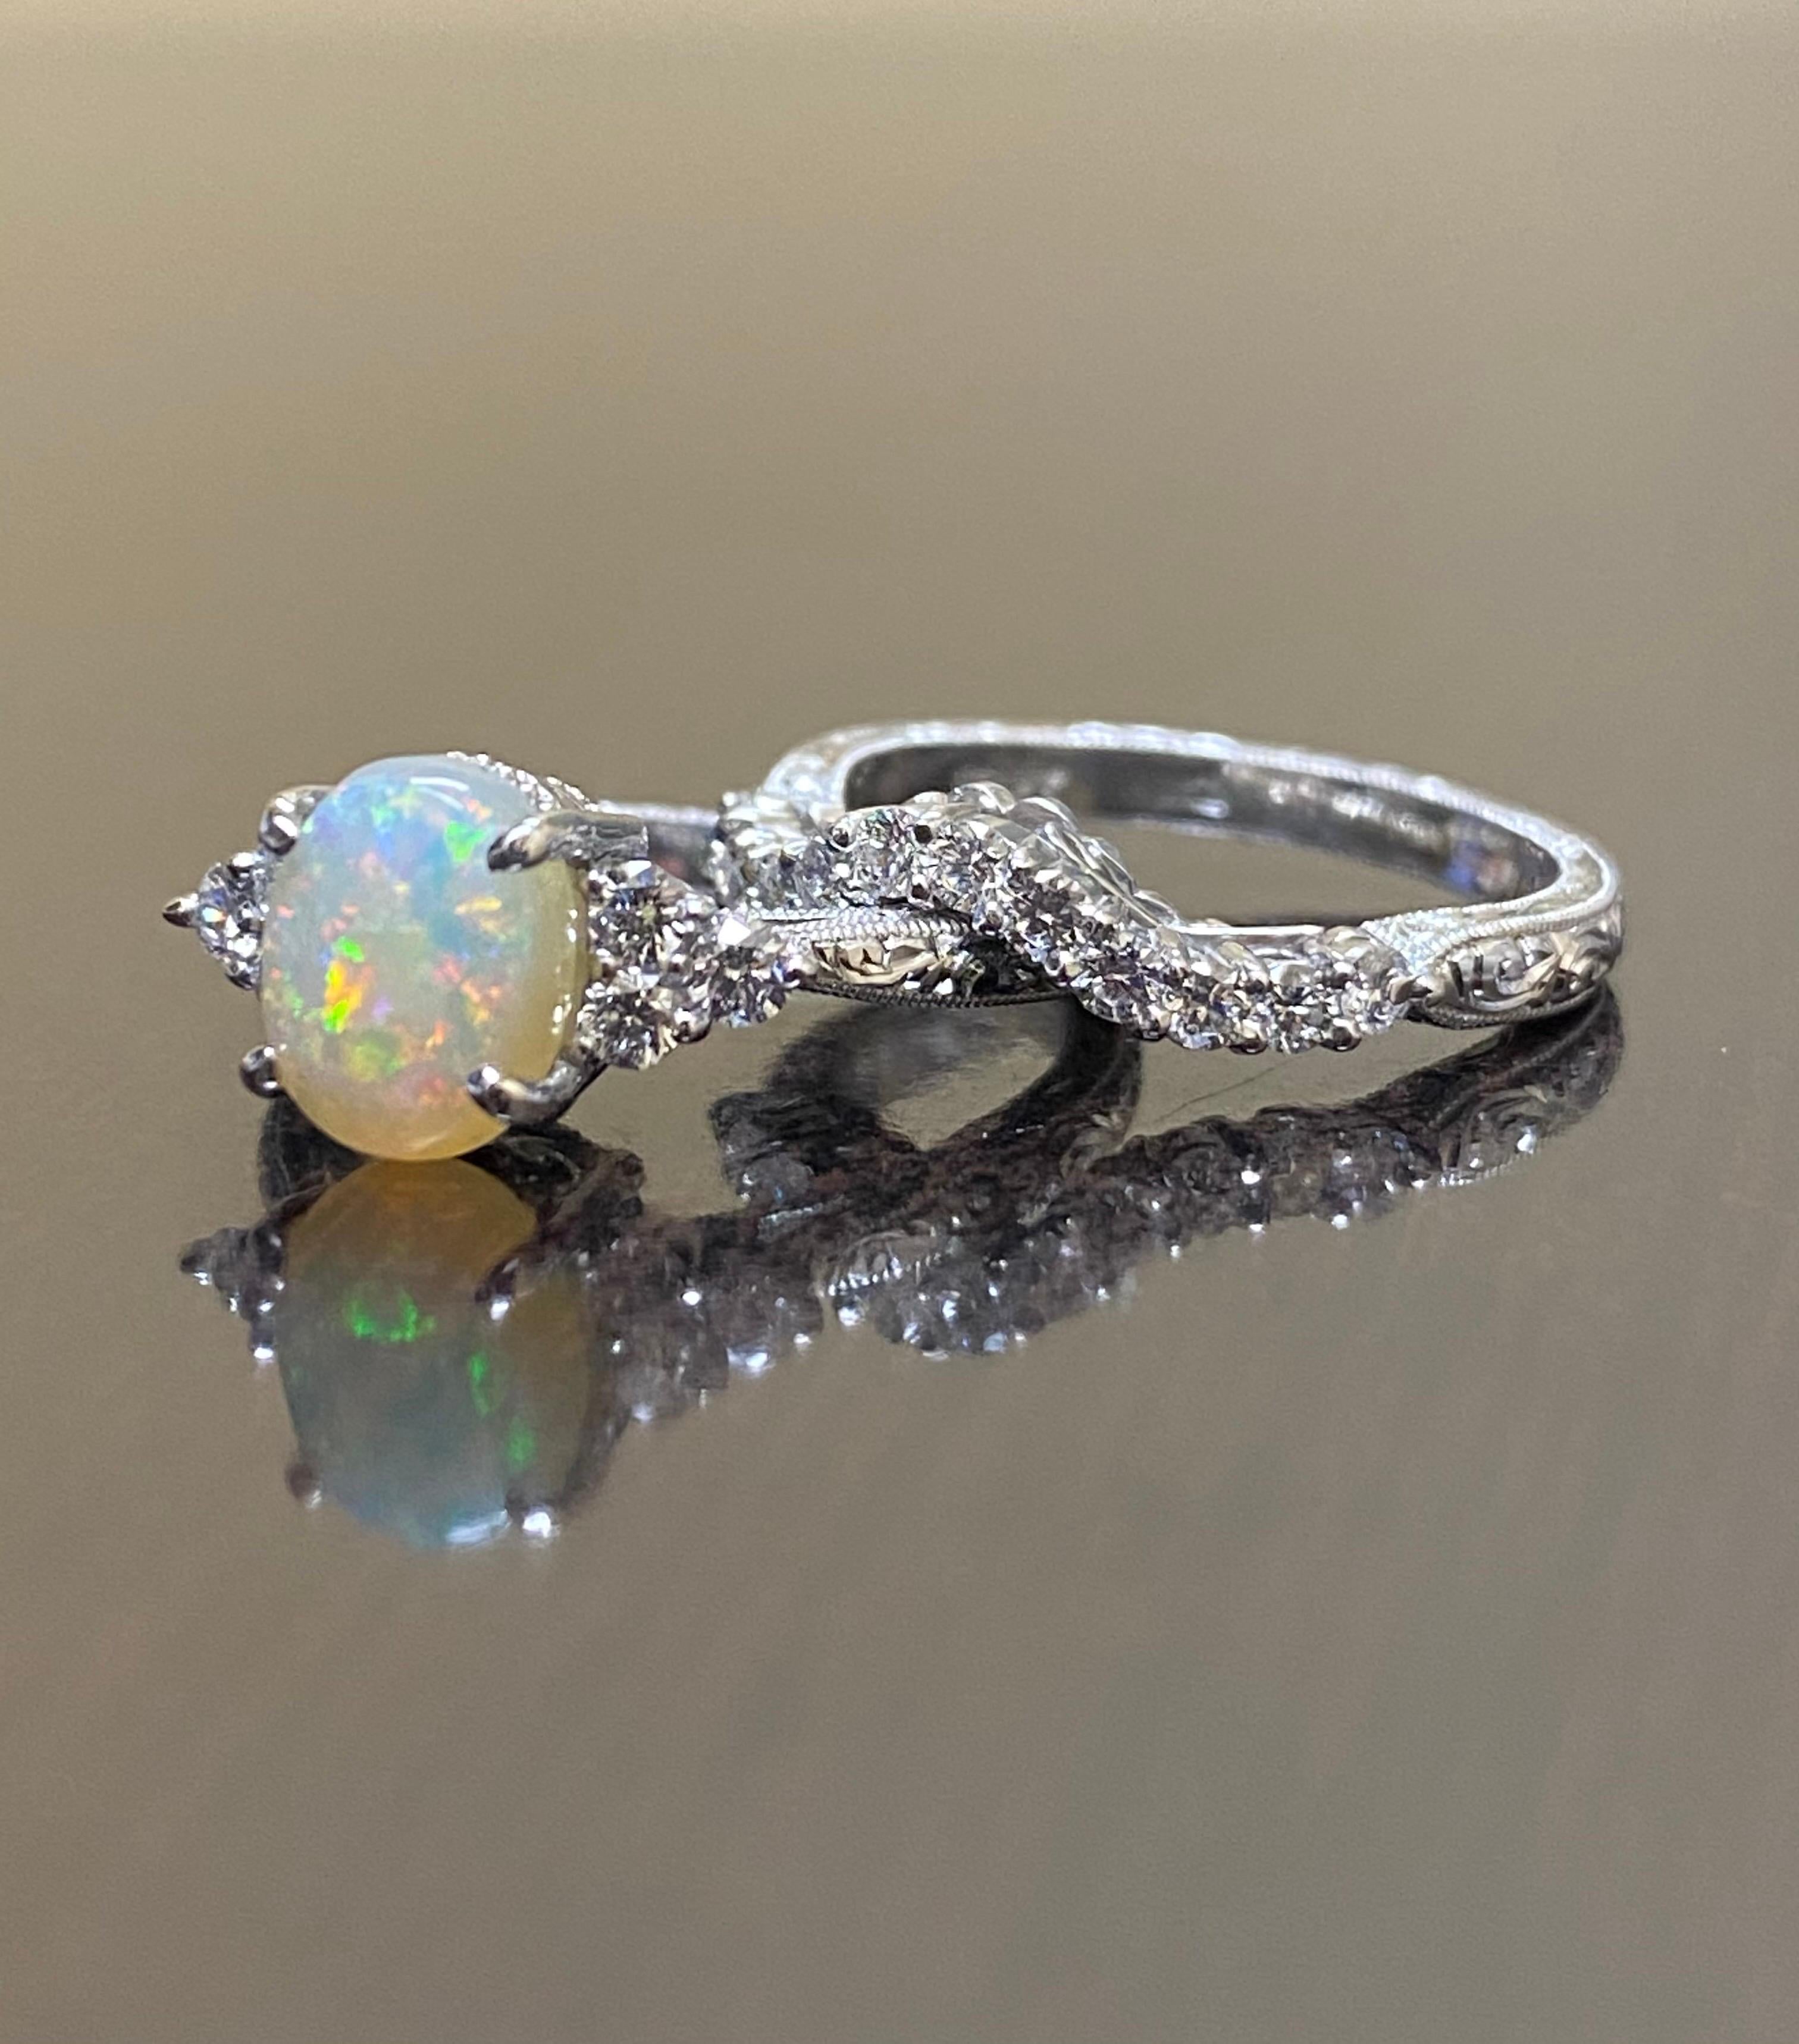 Hand Engraved Platinum Art Deco Diamond Opal Engagement Ring Bridal Set In New Condition For Sale In Los Angeles, CA